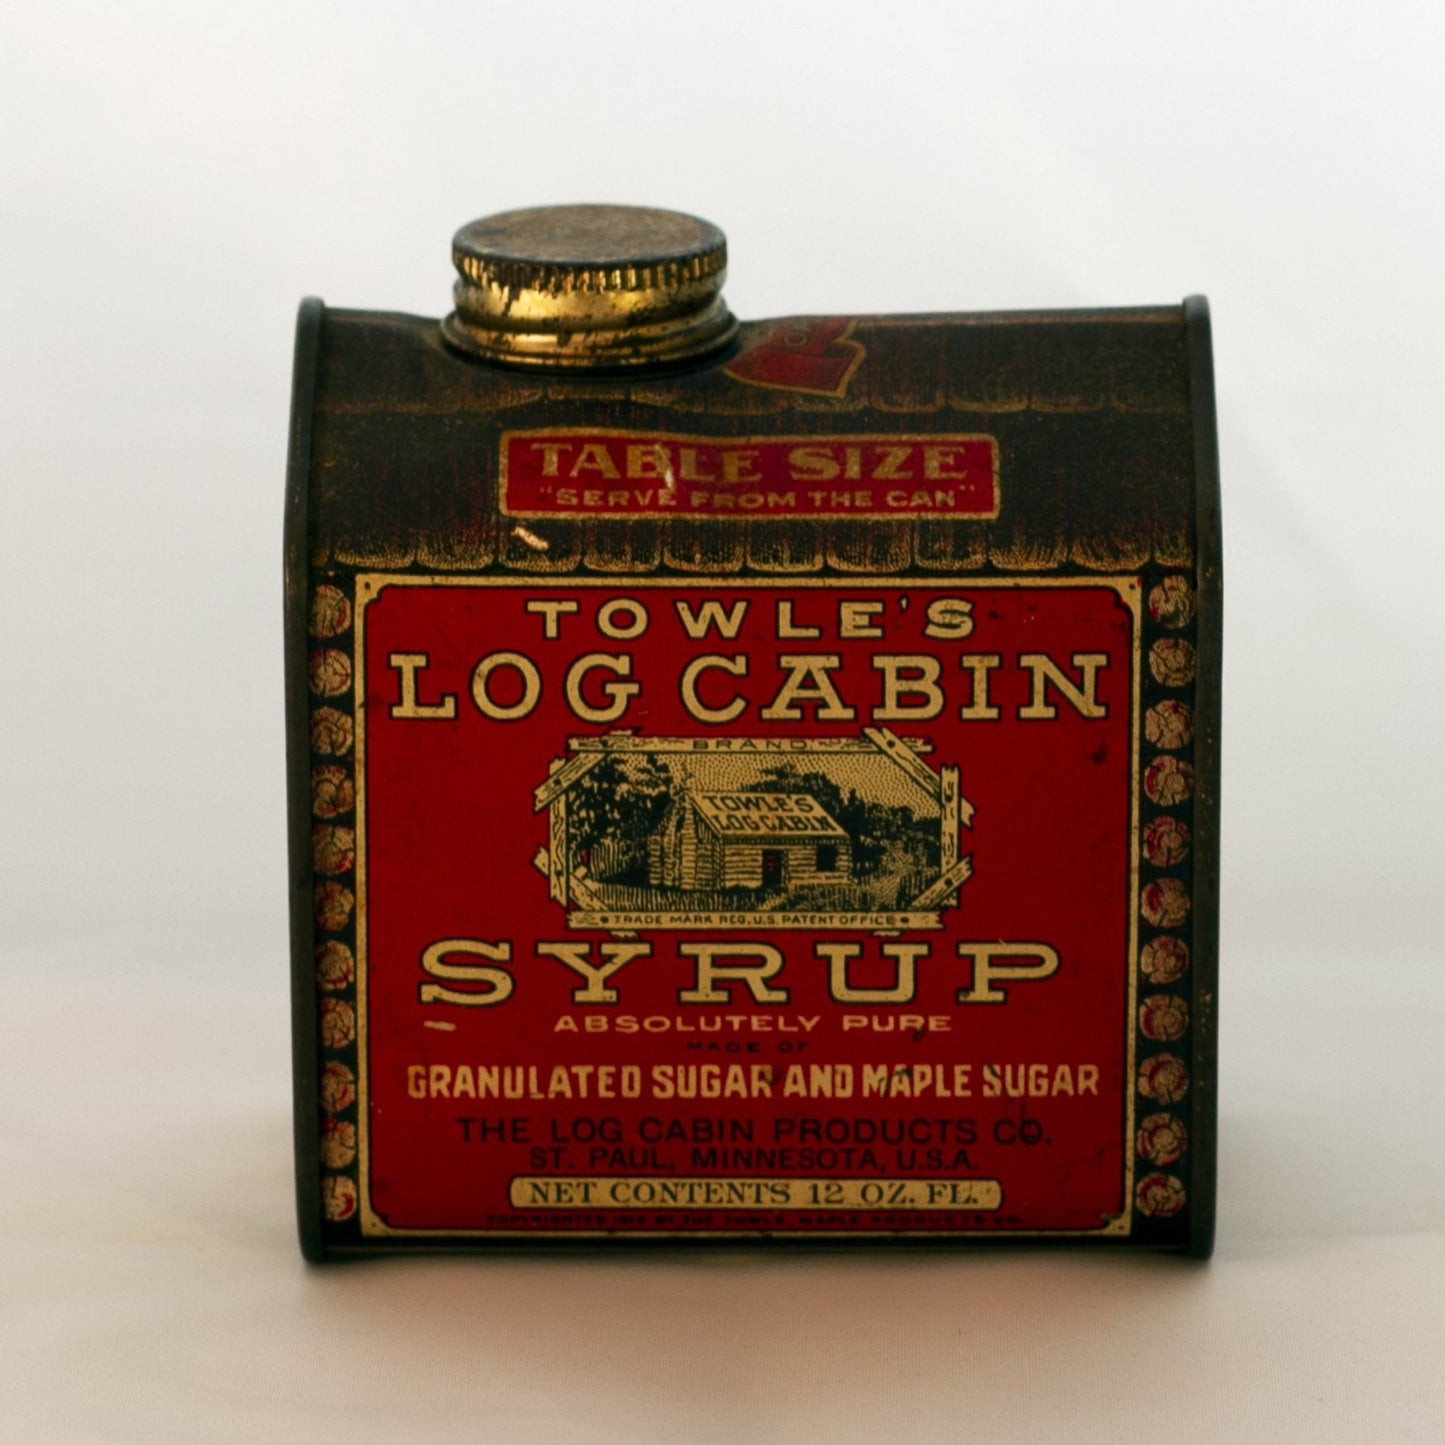 Antique TOWLE’S LOG CABIN SYRUP TIN Copyright 1914 "Boy in Doorway" Jack Towle 12-Ounce Capacity